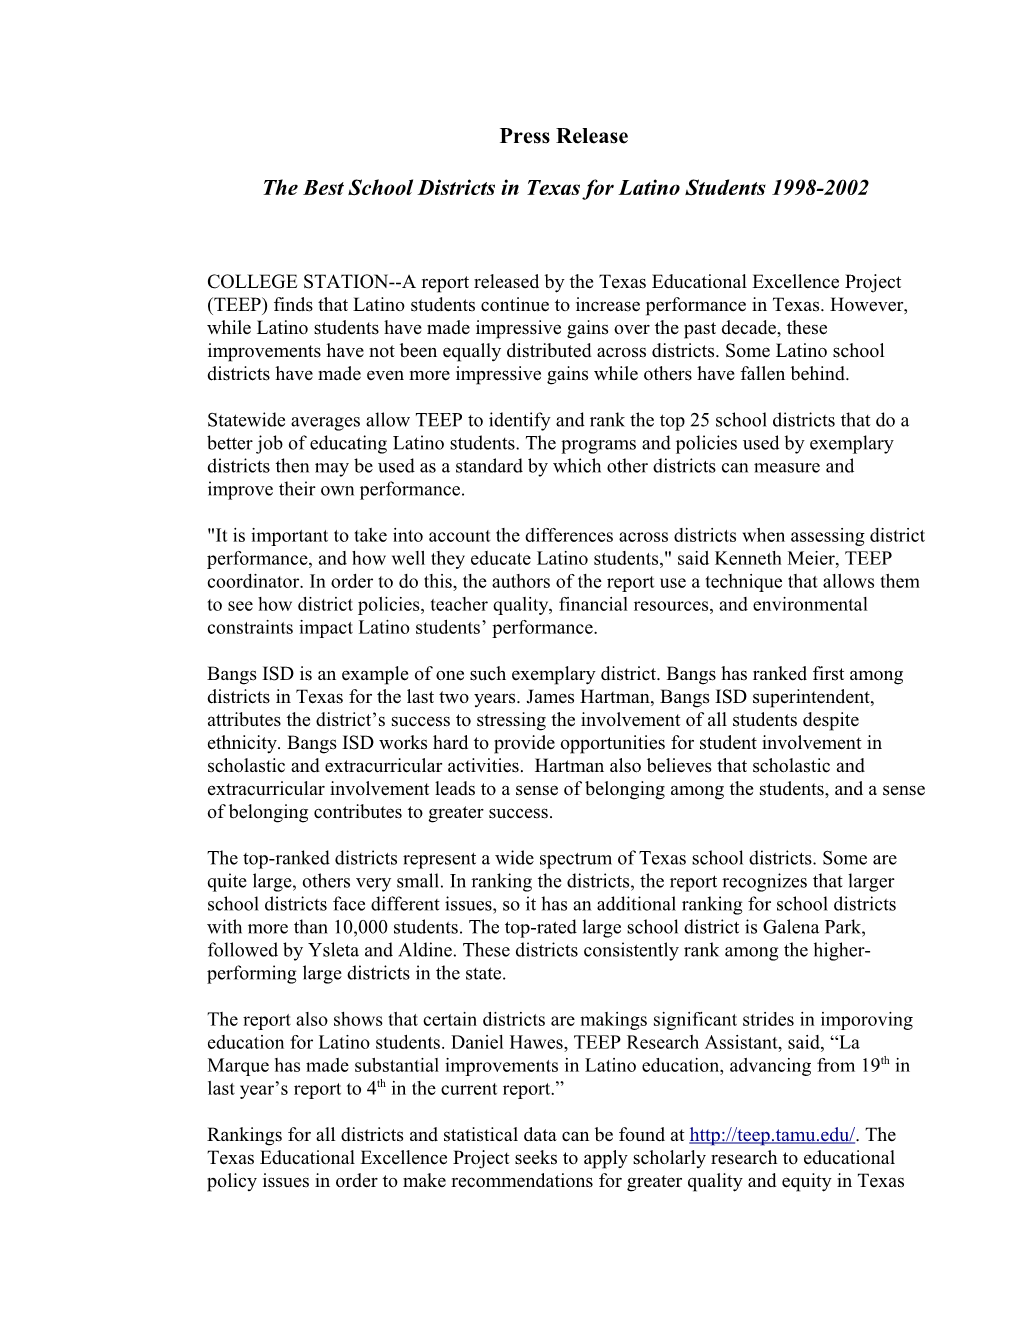 Press Release the Best School Districts in Texas for Latino Students 1998-2002